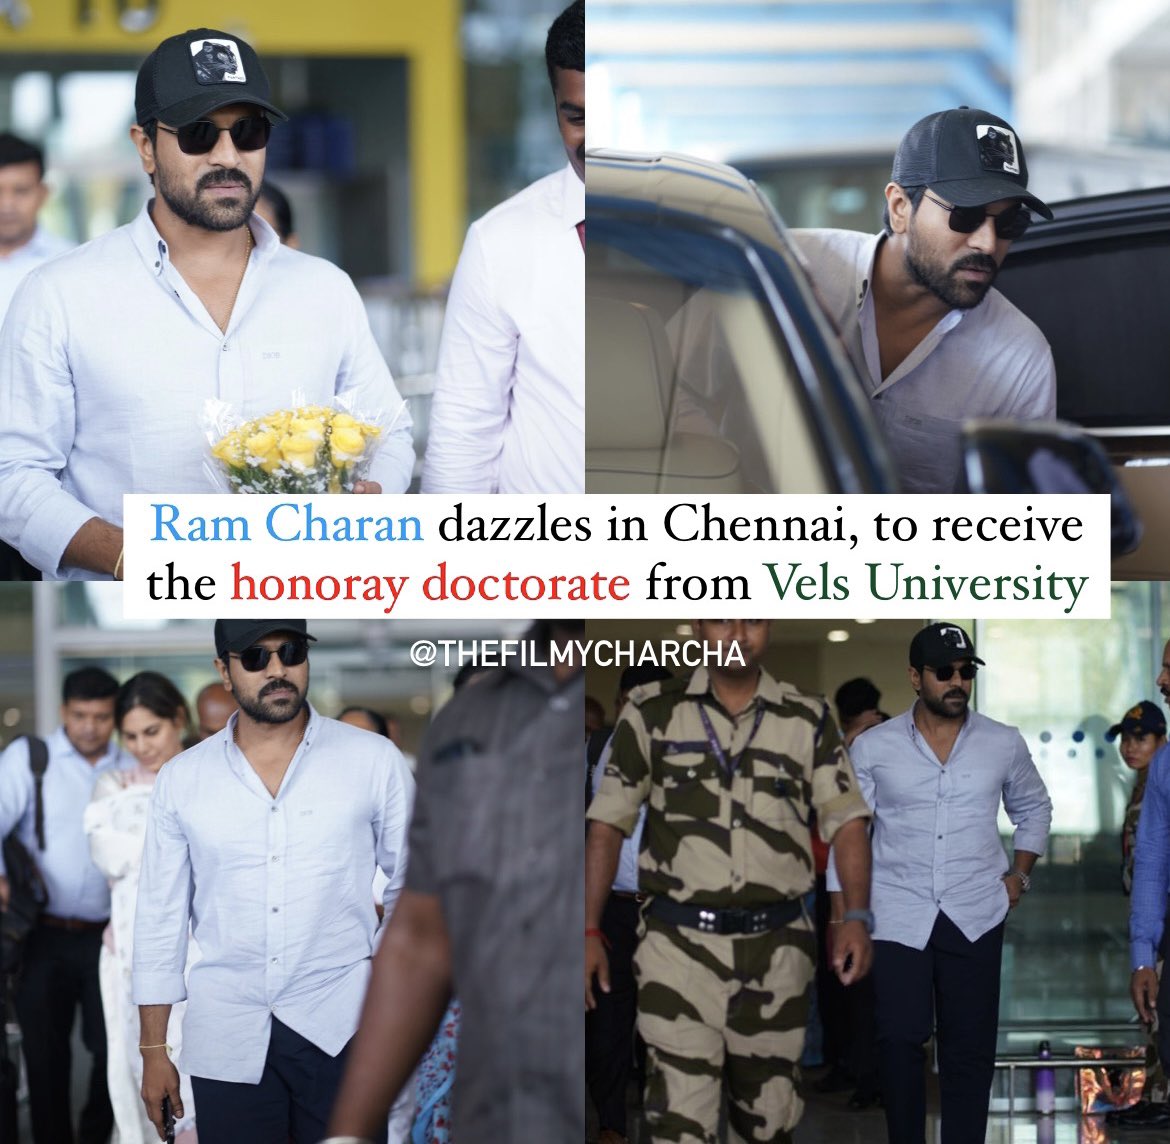 Dapper, suave, and full of charm – Global star Ram Charan shines in Chennai as arrives to  a receive the honorary doctorate from Vels University.

#GlobalStarRamCharan 
#RC #VelsUniversity #RamCharan #GameChanger #RC16 #RC17
#rcrcrcramcharan
@alwaysramcharan